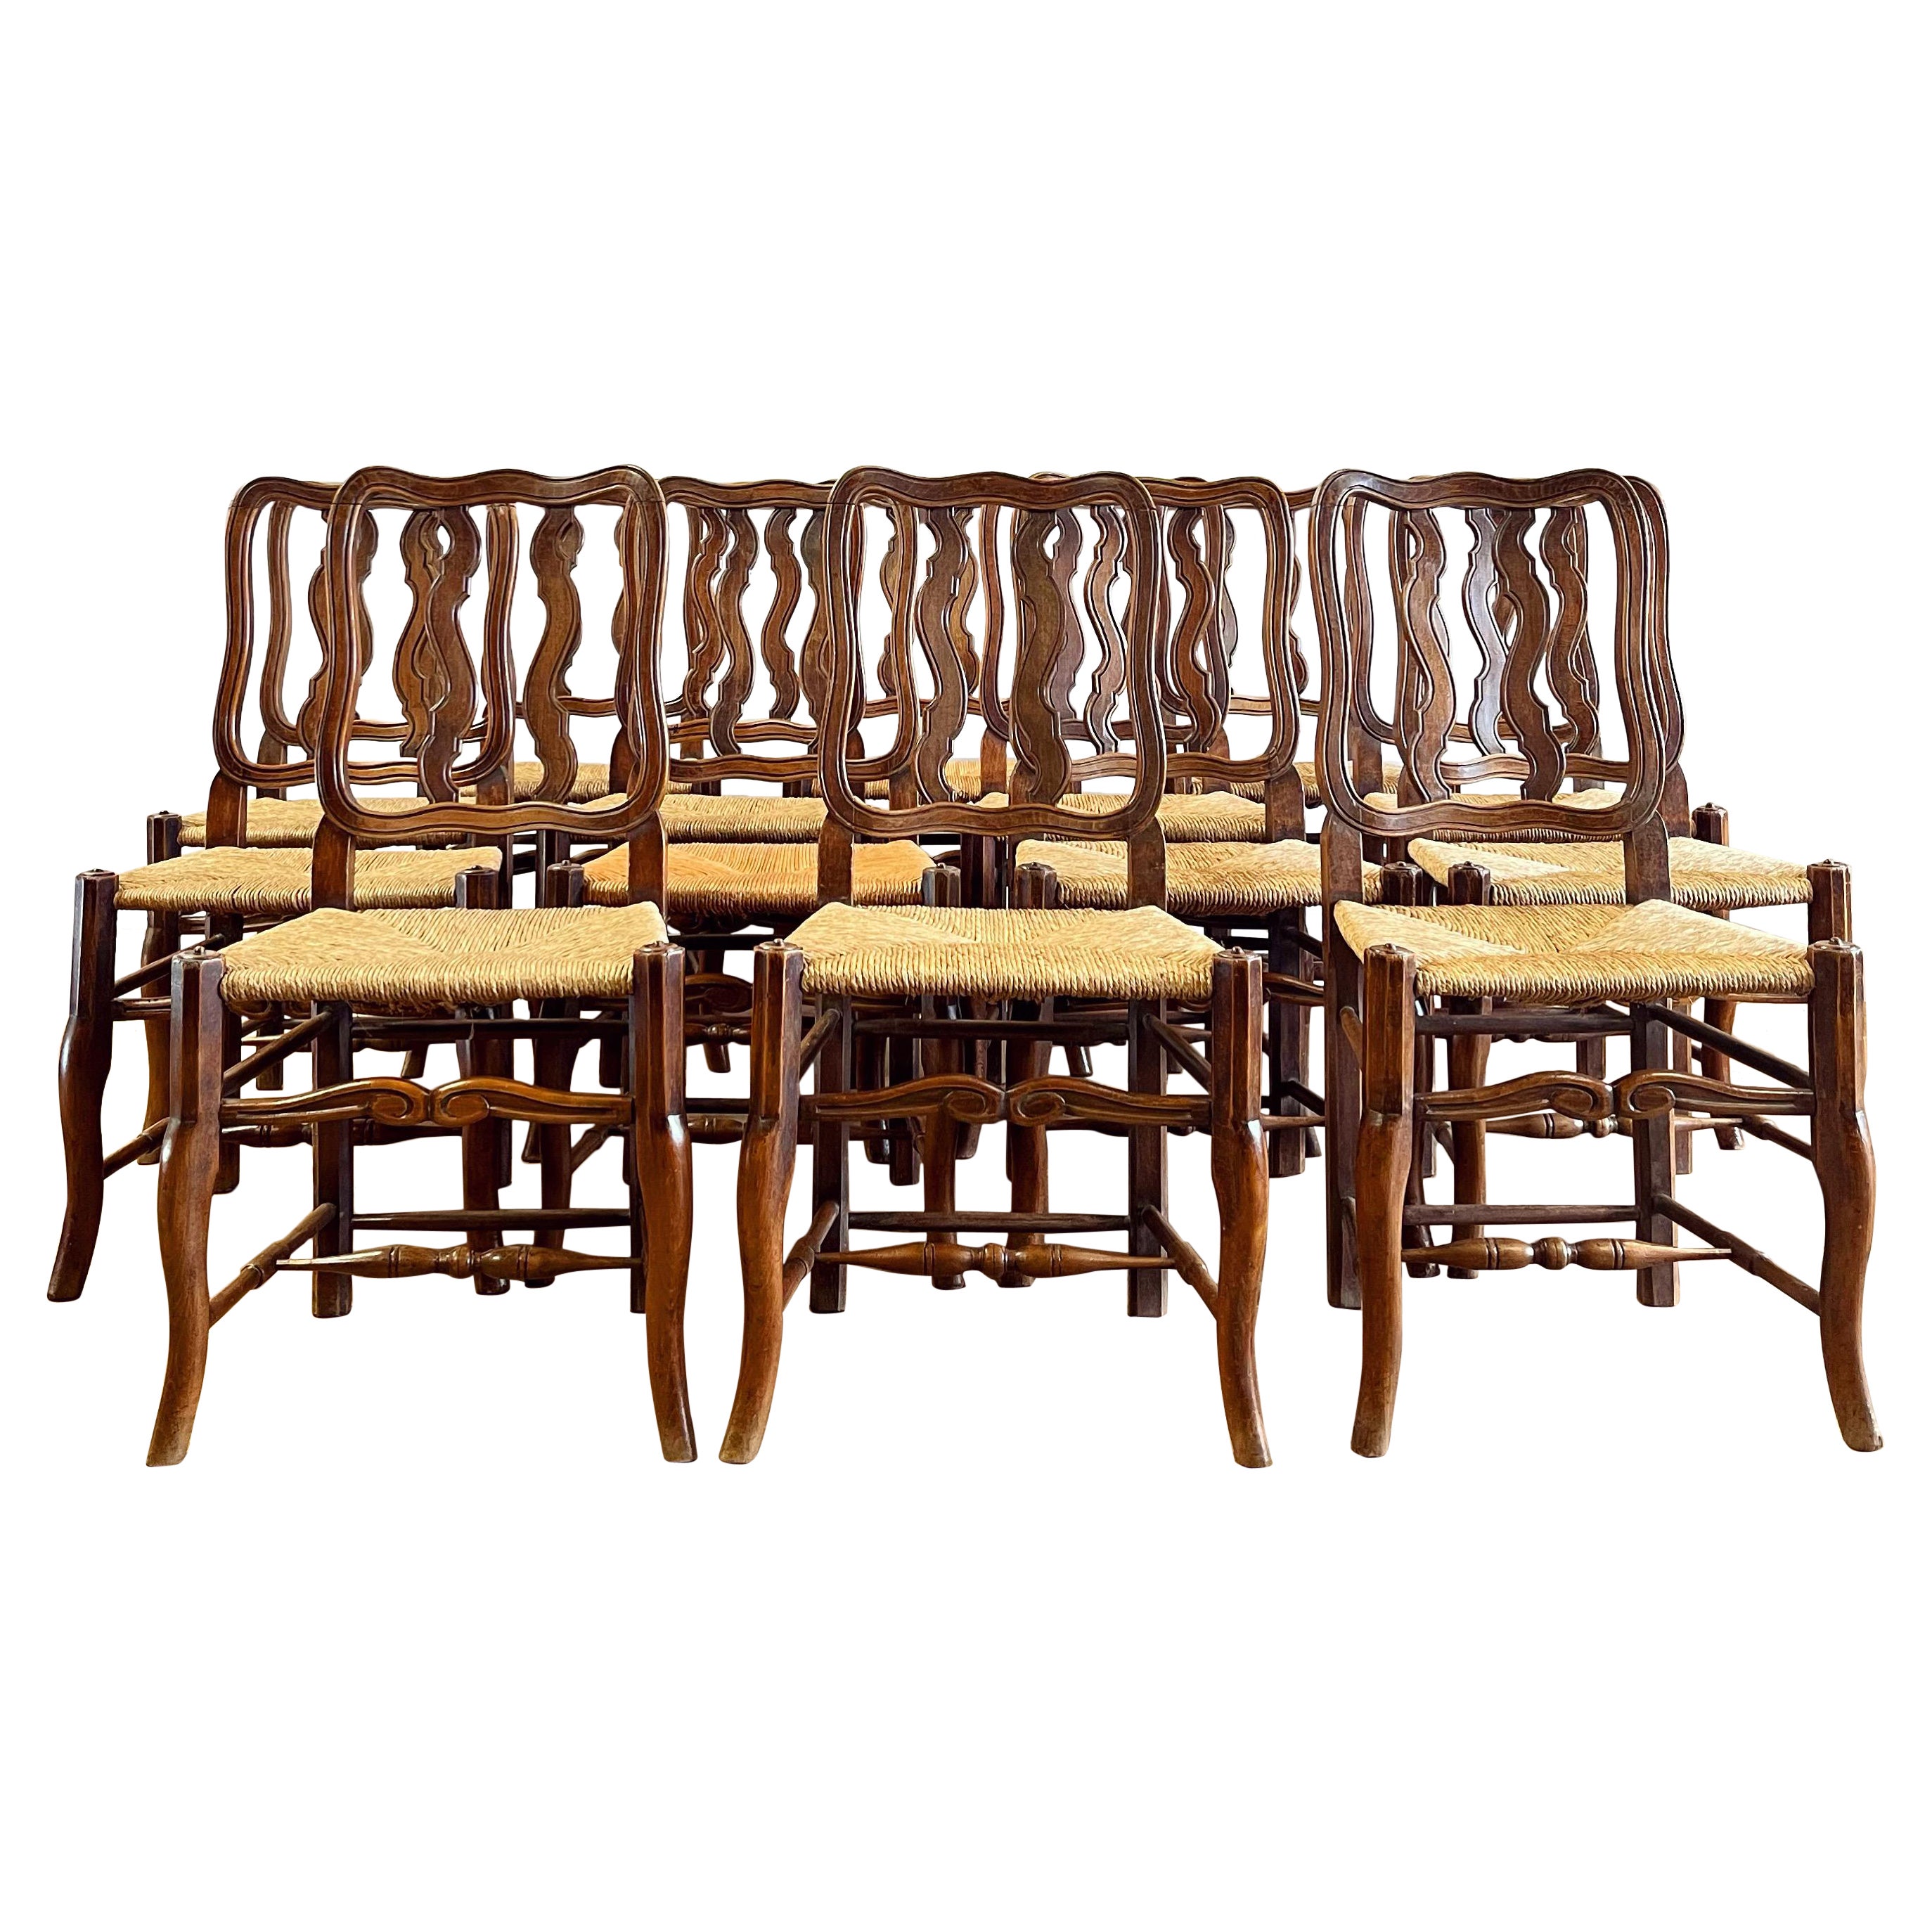 Set of Fourteen Early Twentieth Century French Vernacular Dining Chairs